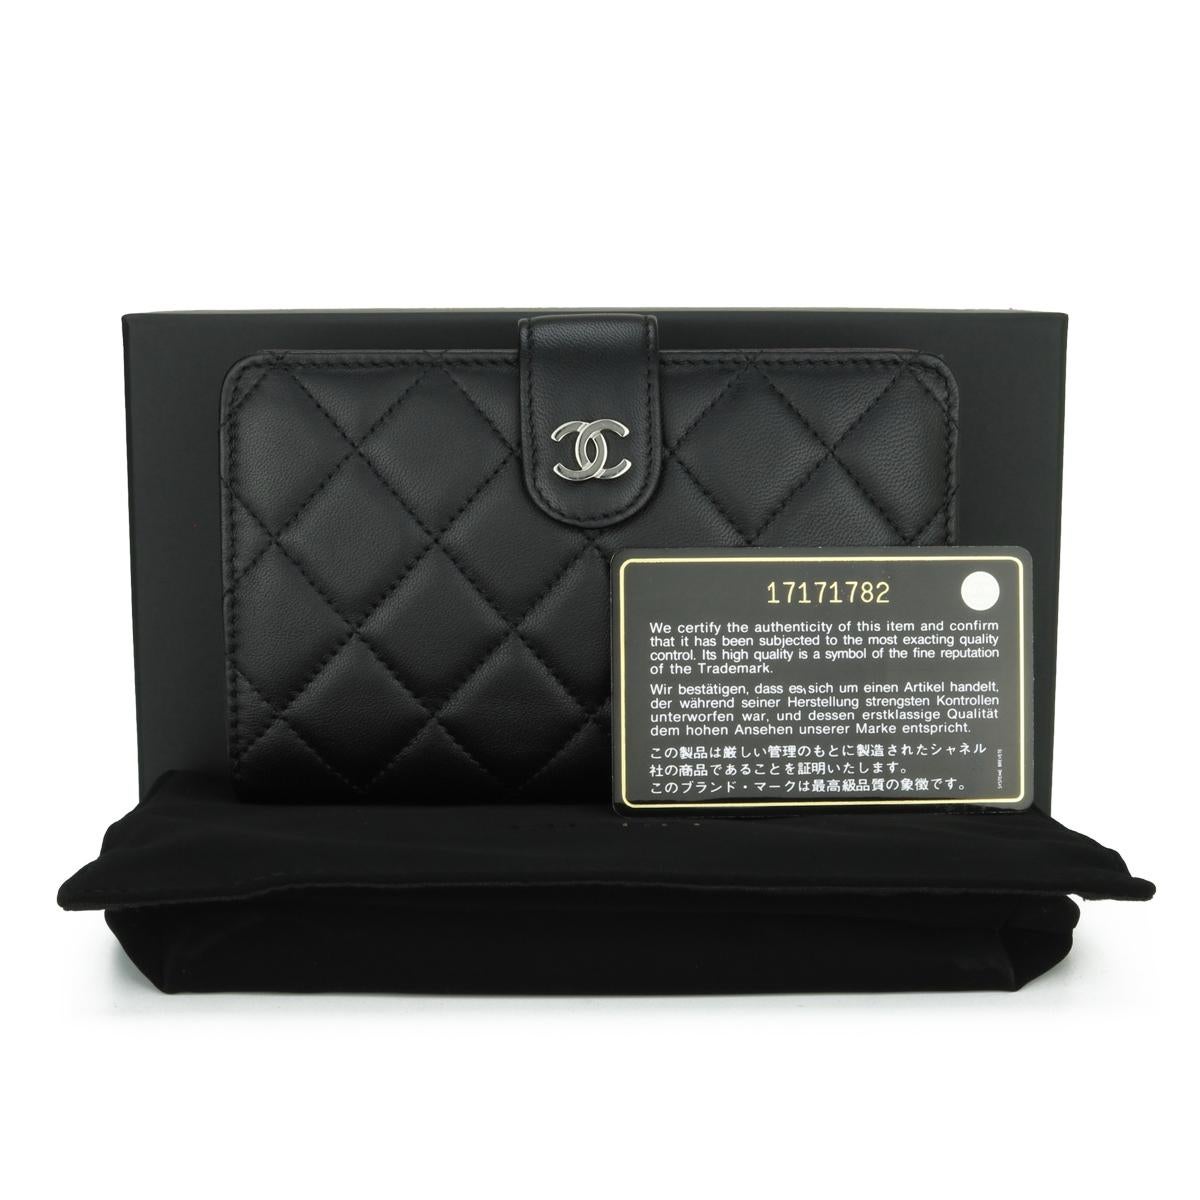 Chanel Quilted Bifold Classic Zipped Pocket Medium Wallet Black Lambskin with Silver Hardware 2013.

This stunning classic wallet is in very good condition, the wallet still holds its original shape, and the hardware is still very shiny.

- Exterior